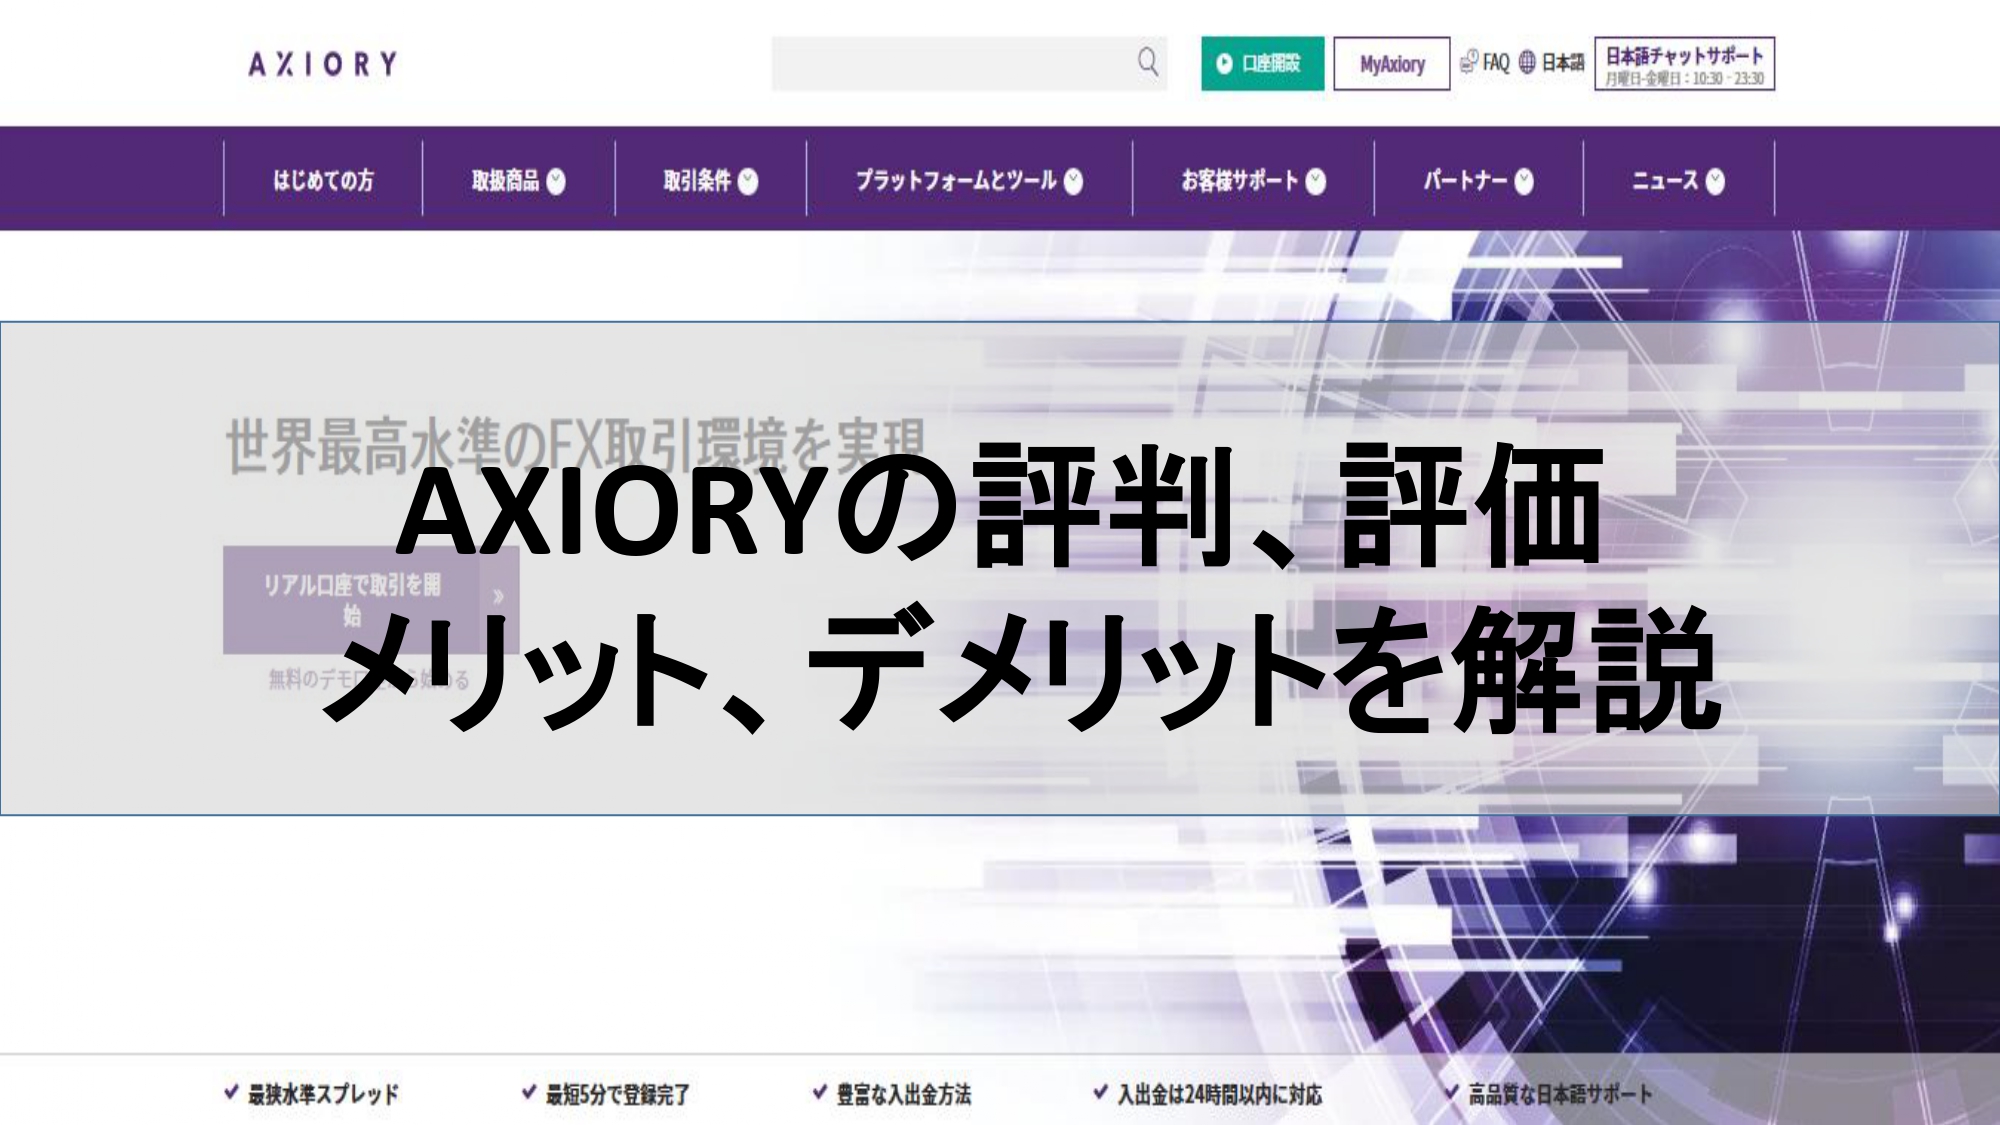 AXIORY（アキシオリー）の評判、評価